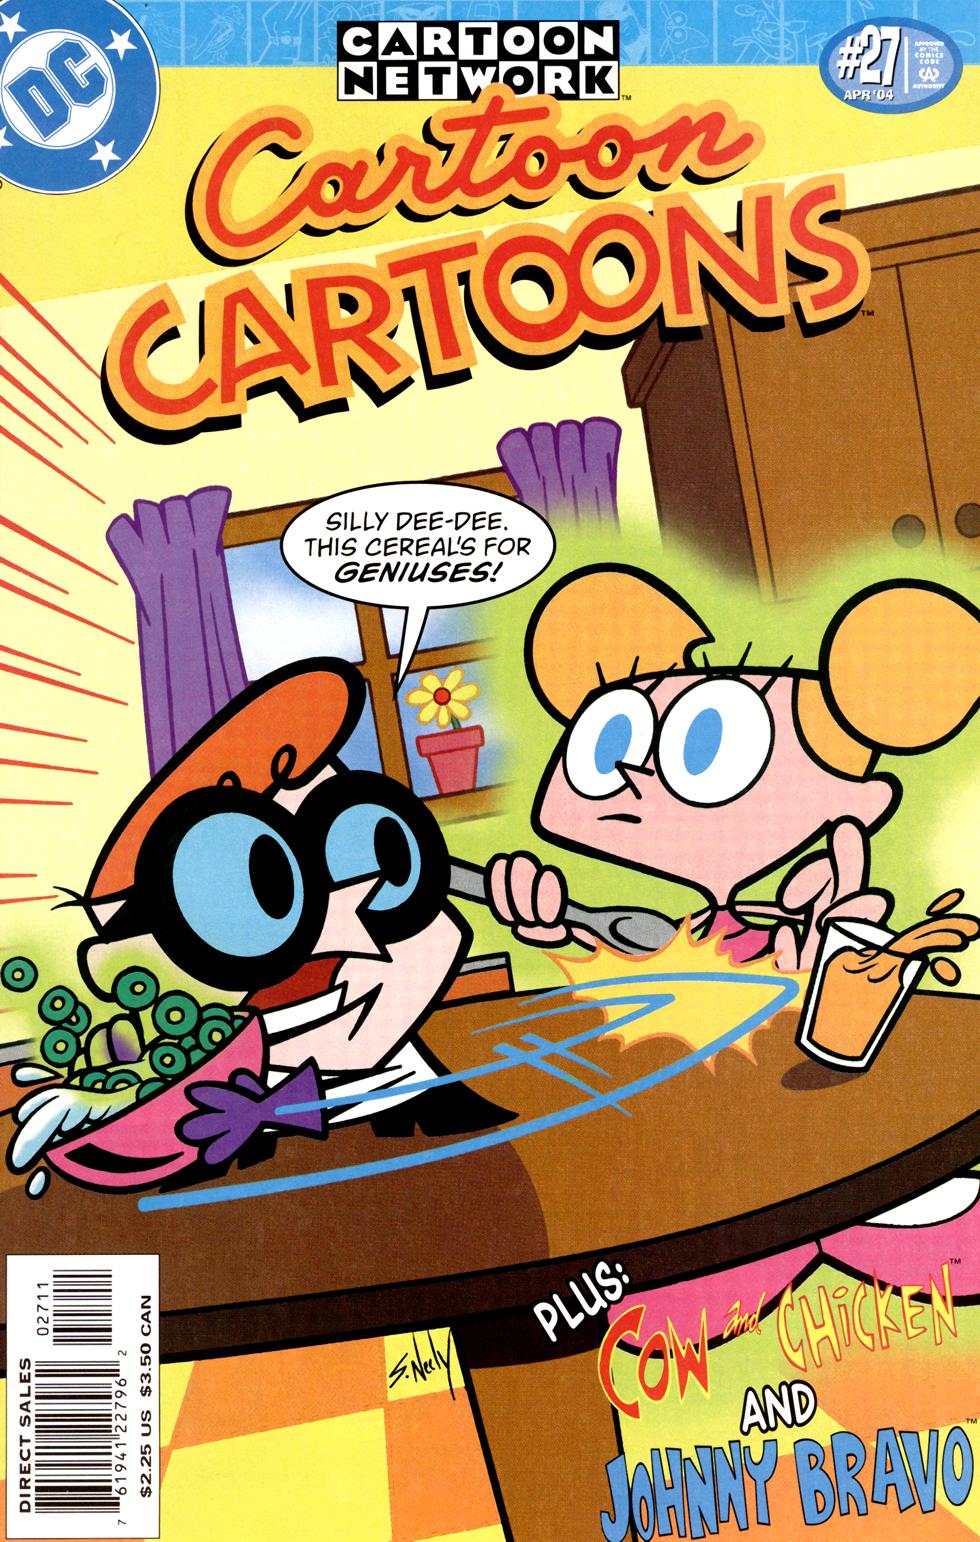 Cartoon Cartoons Issue 27 | Read Cartoon Cartoons Issue 27 comic online in  high quality. Read Full Comic online for free - Read comics online in high  quality .